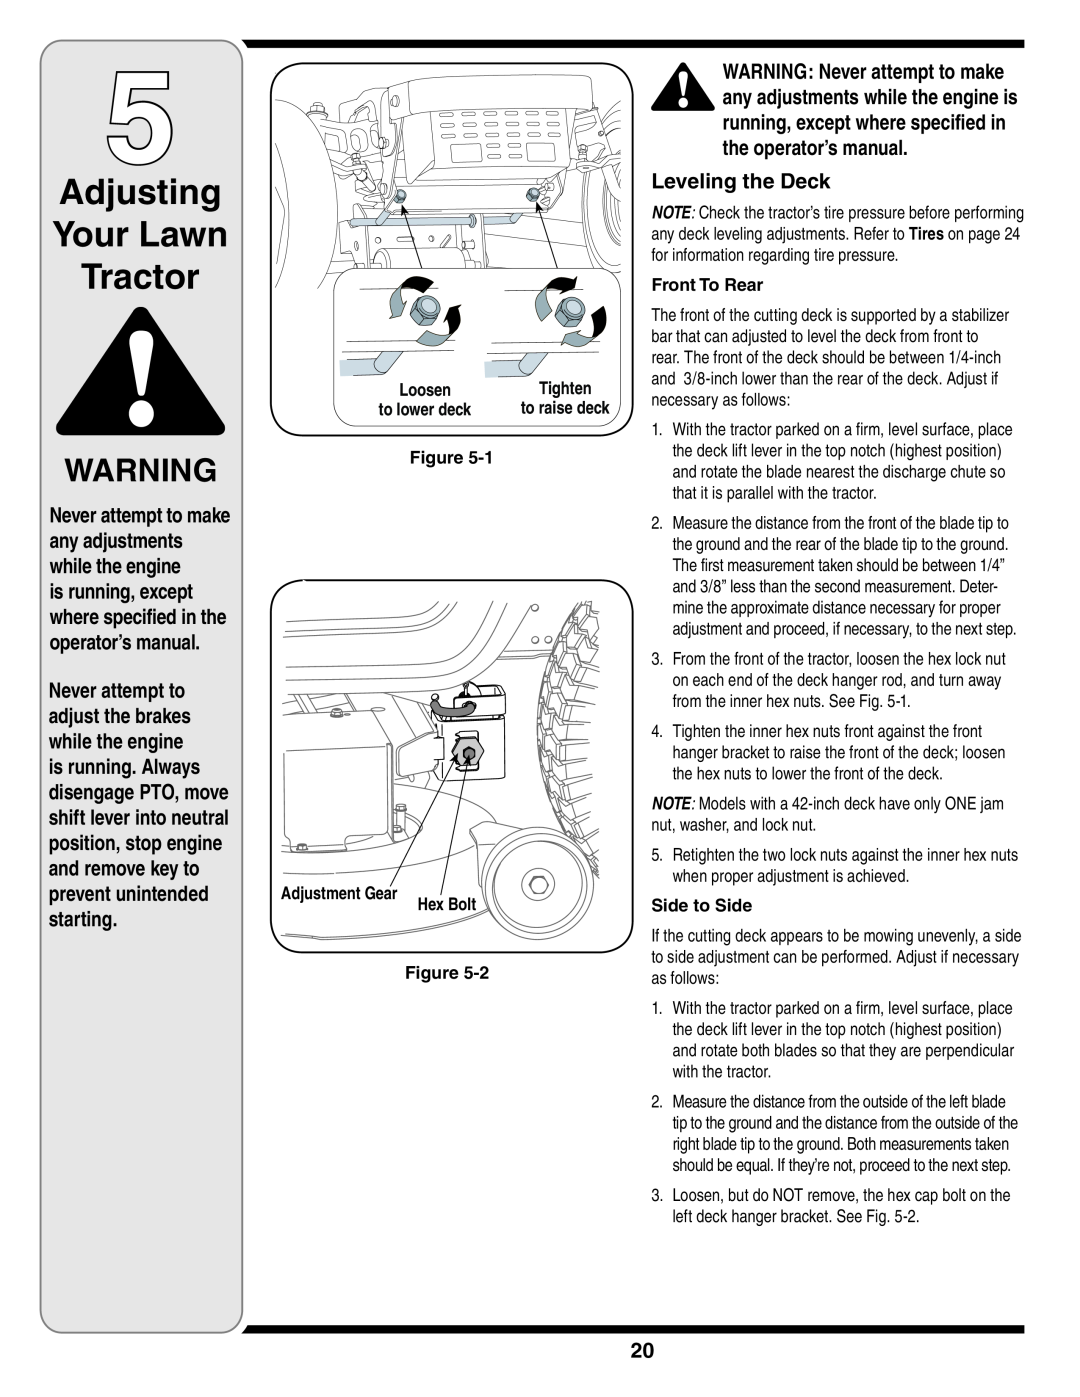 MTD 616 warranty Adjusting Your Lawn Tractor, Leveling the Deck, Front To Rear, Side to Side 